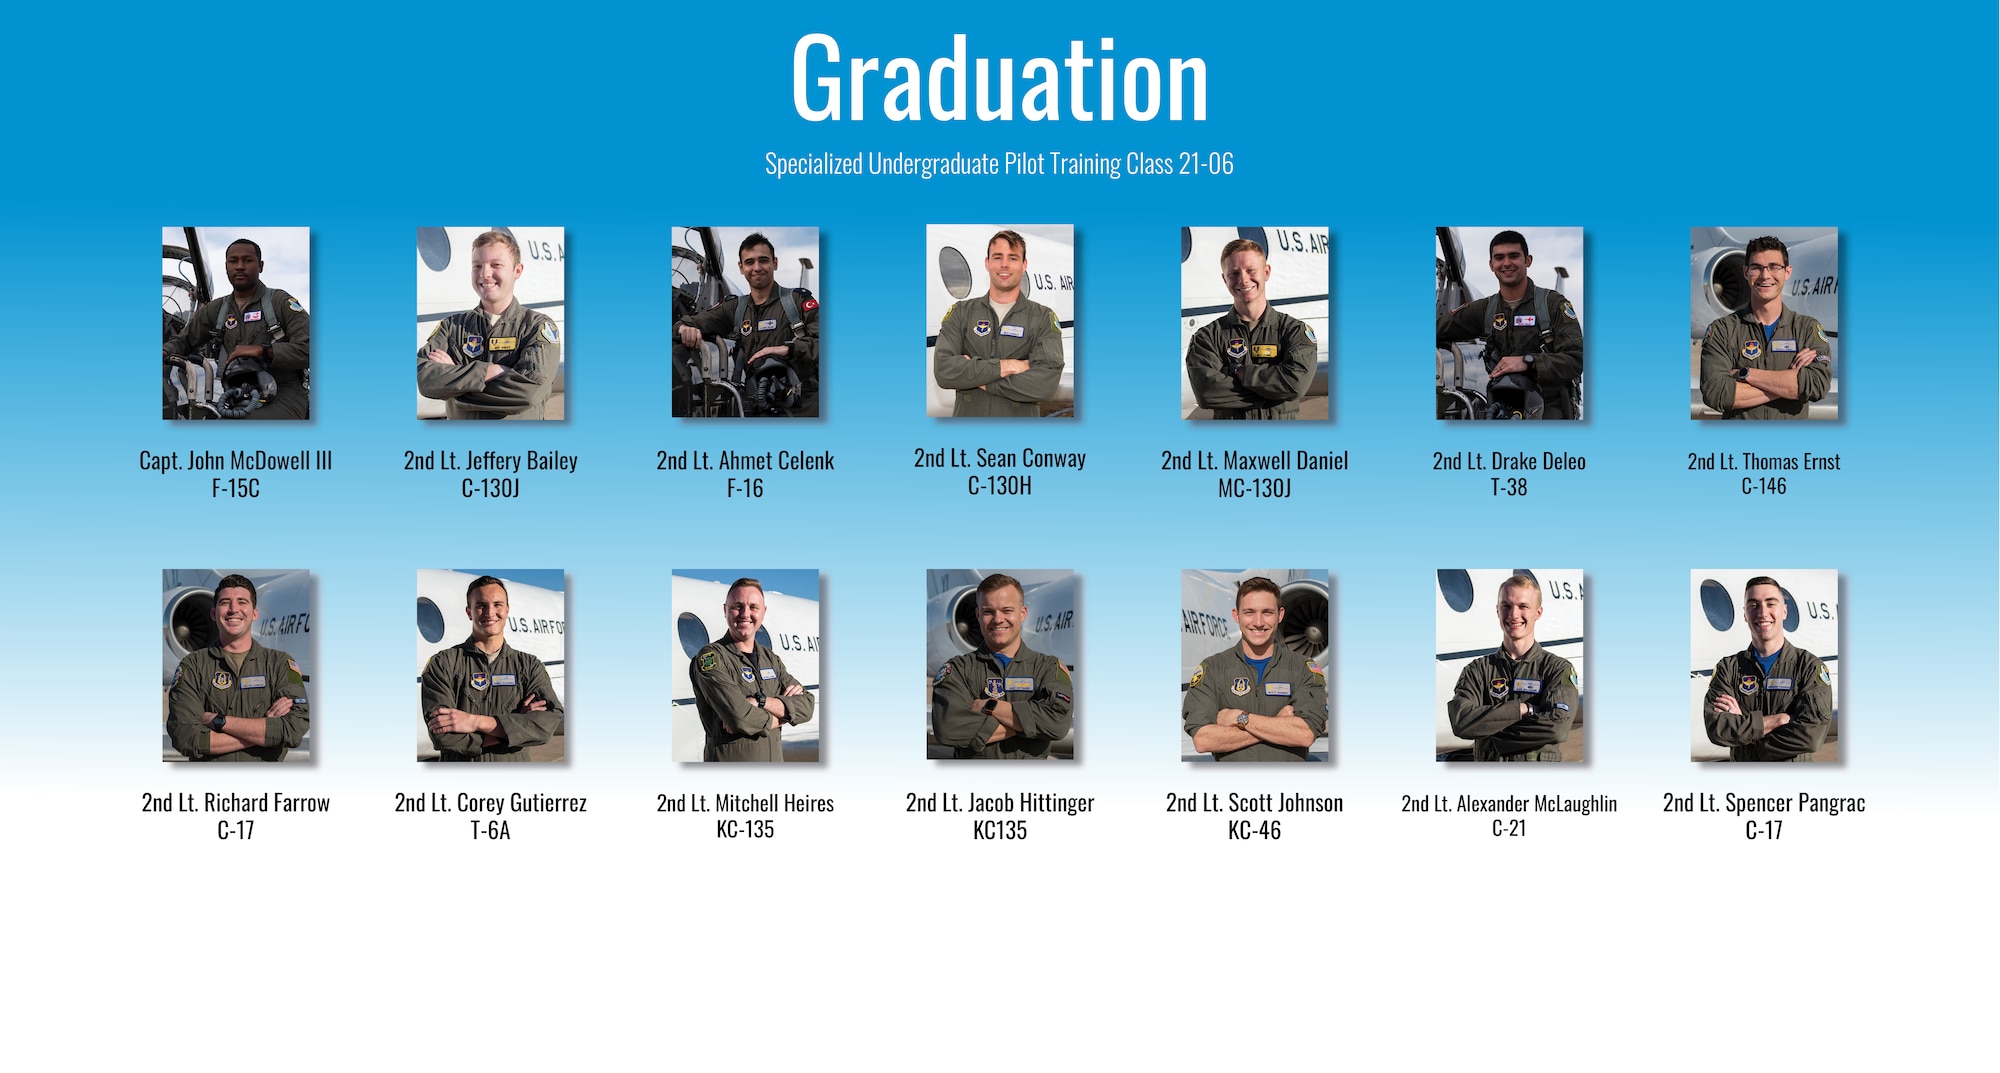 Specialized Undergraduate Pilot Training class 21-06 graduated after 52 weeks of training at Laughlin Air Force Base, Texas, Feb. 26, 2021. Laughlin is home of the 47th Flying Training Wing, whose mission is to build combat-ready Airmen, leaders and pilots. (U.S. Air Force graphic by Senior Airman Anne McCready)